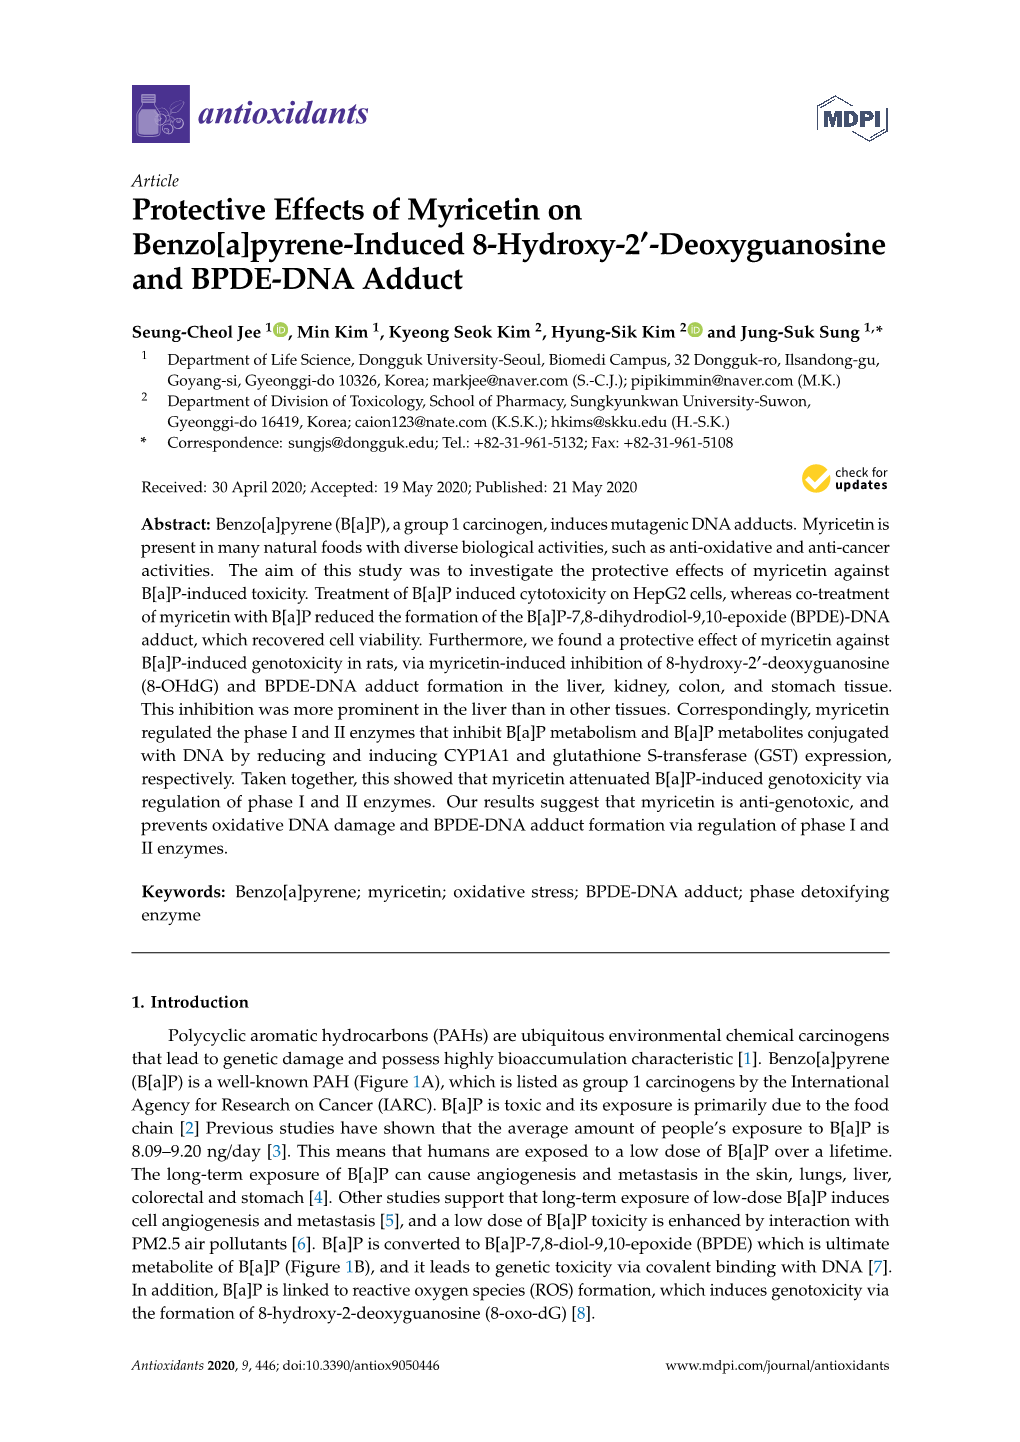 Protective Effects of Myricetin on Benzo[A]Pyrene-Induced 8-Hydroxy-2'-Deoxyguanosine and BPDE-DNA Adduct